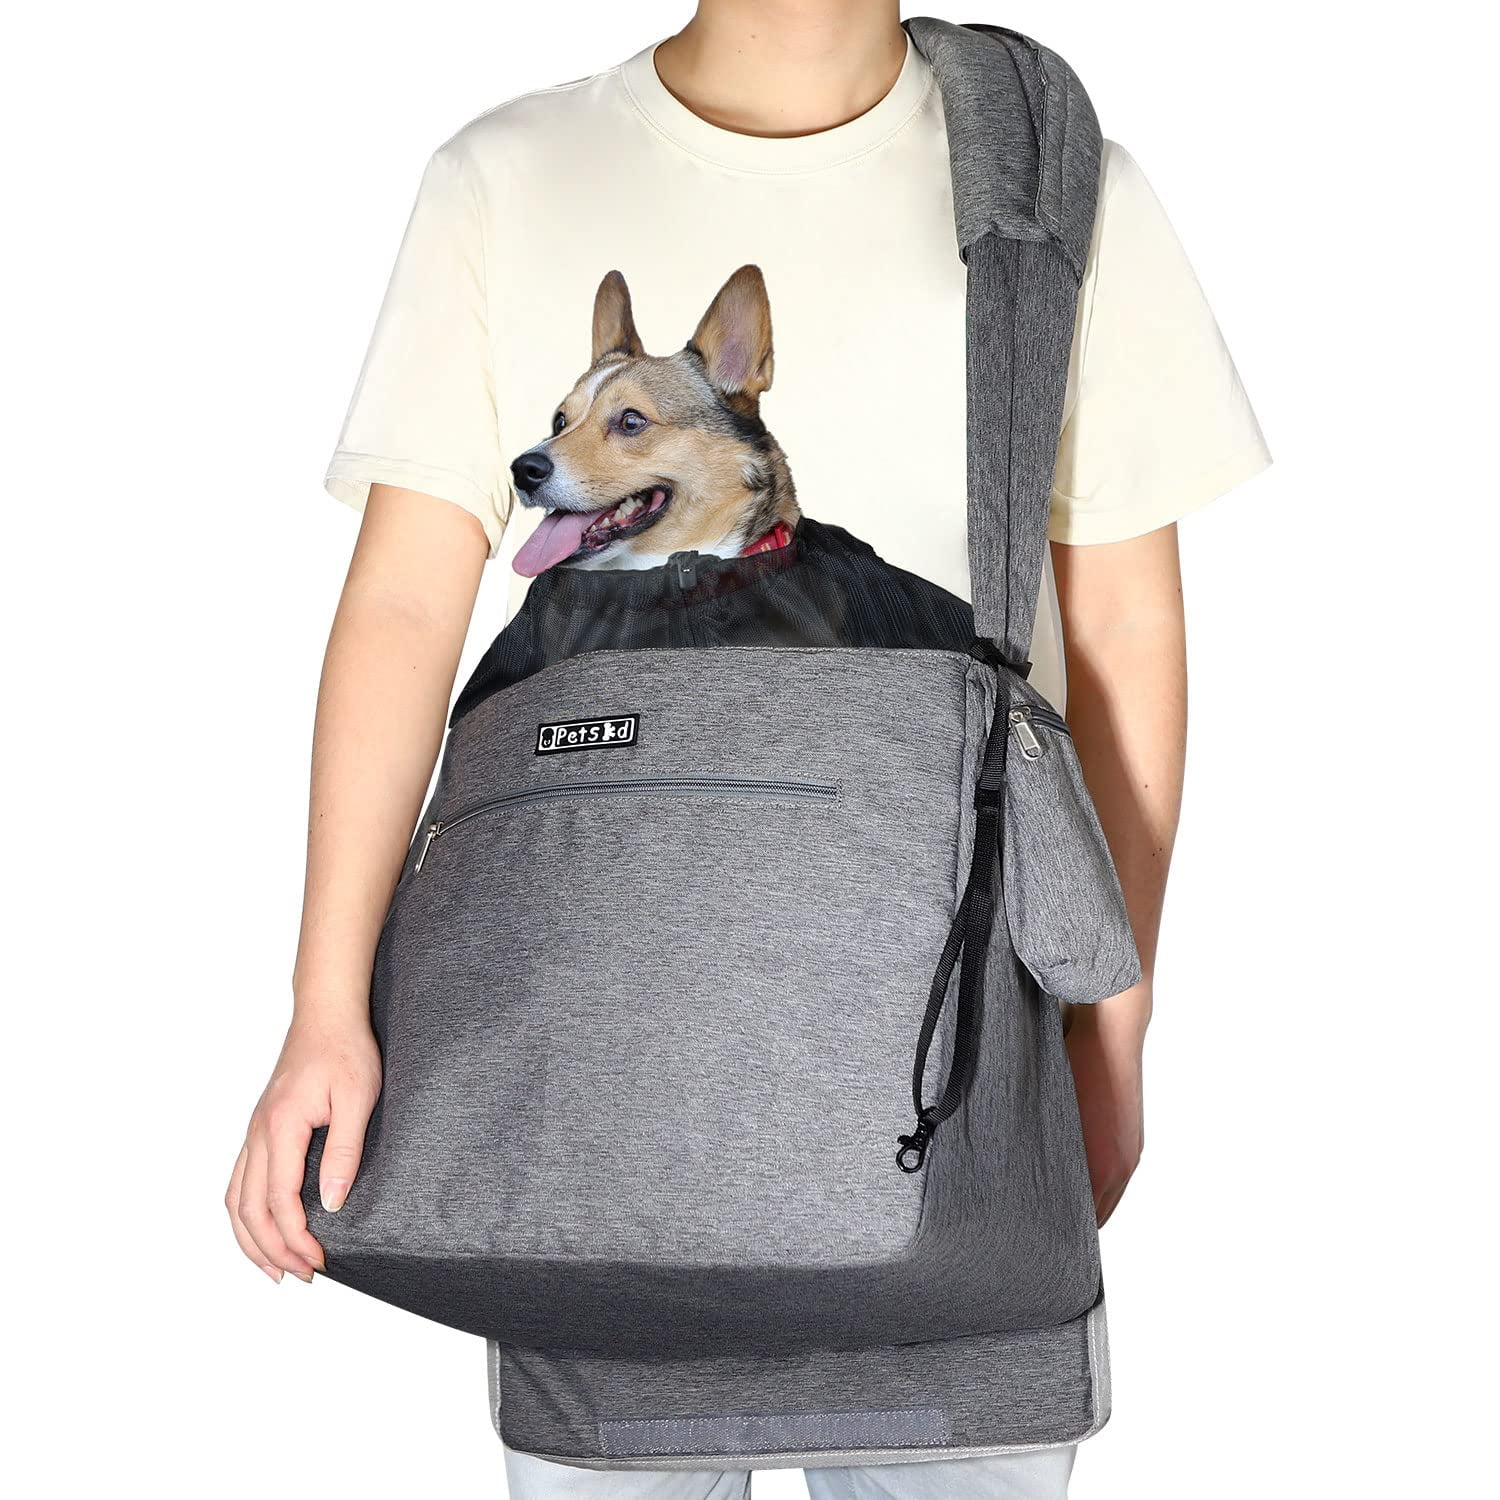 Reddy+Pet+Carrier+Backpack+Black+Mesh+Windows+Zippered+16x13x8+12+Lbs+Limit  for sale online